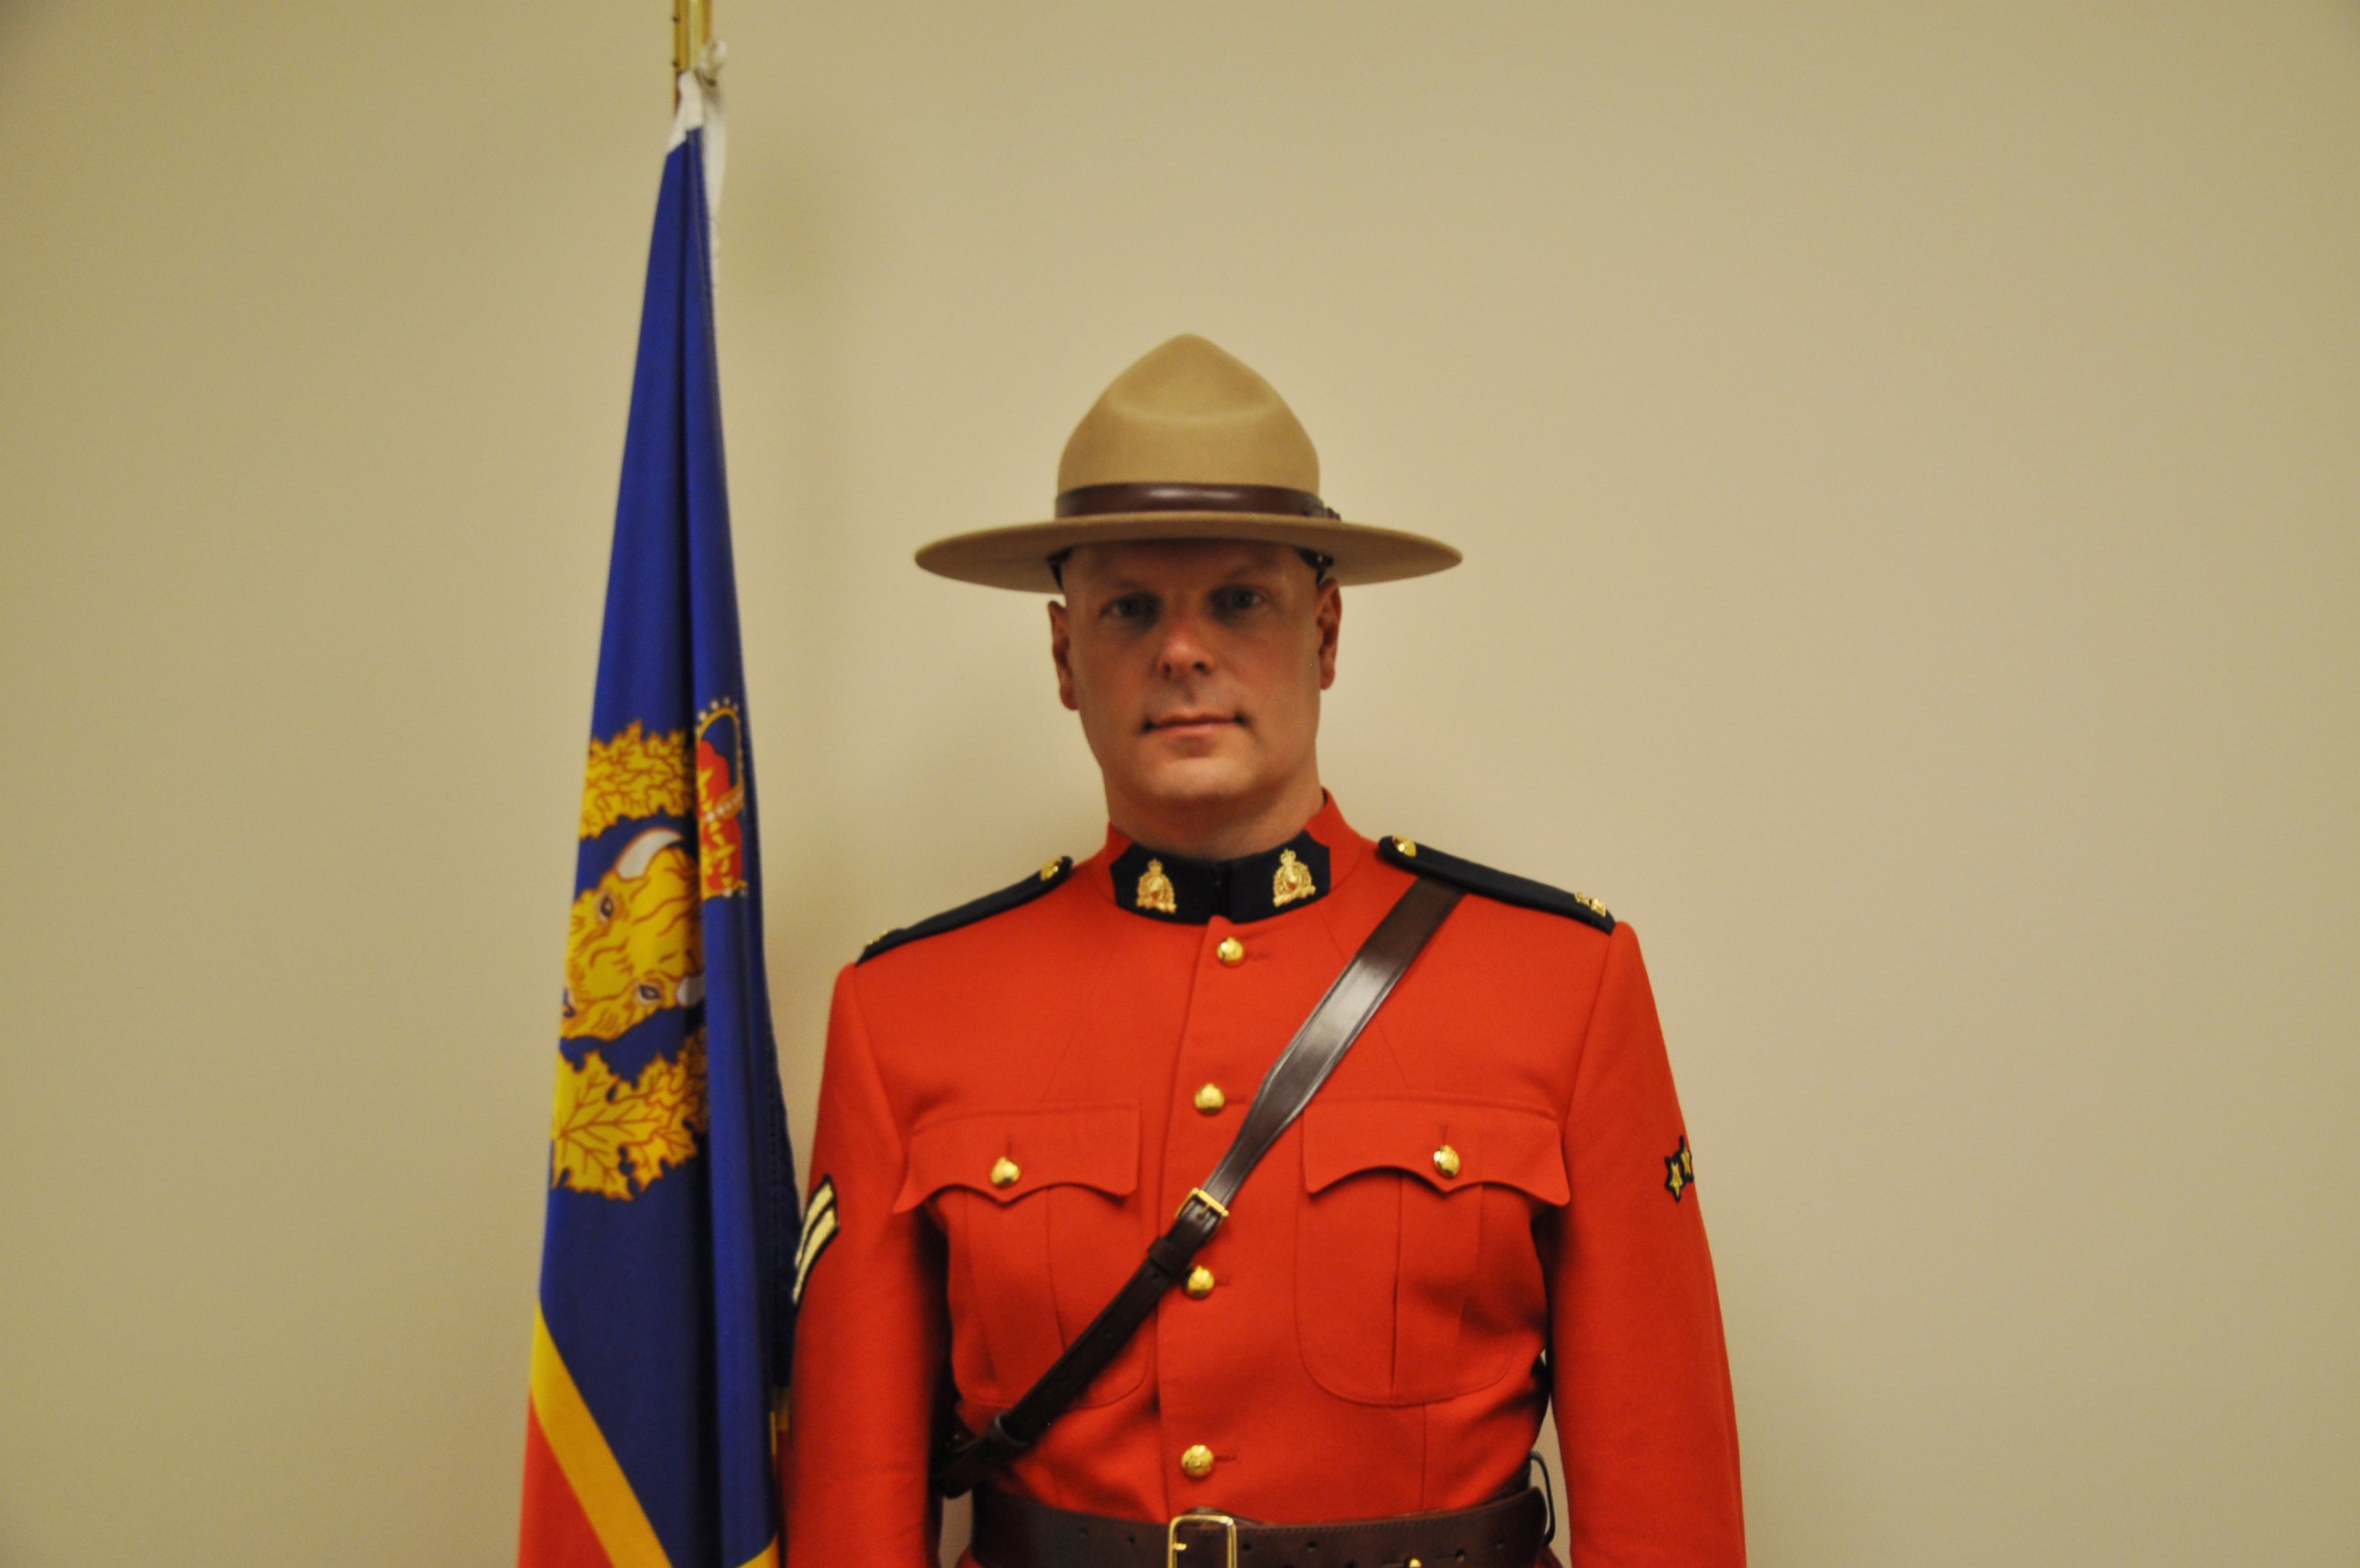 PHOTO: A photo that shows Cpl. Shaun Begg dressed in the uniform of the Royal Canadian Mounted Police is seen here.